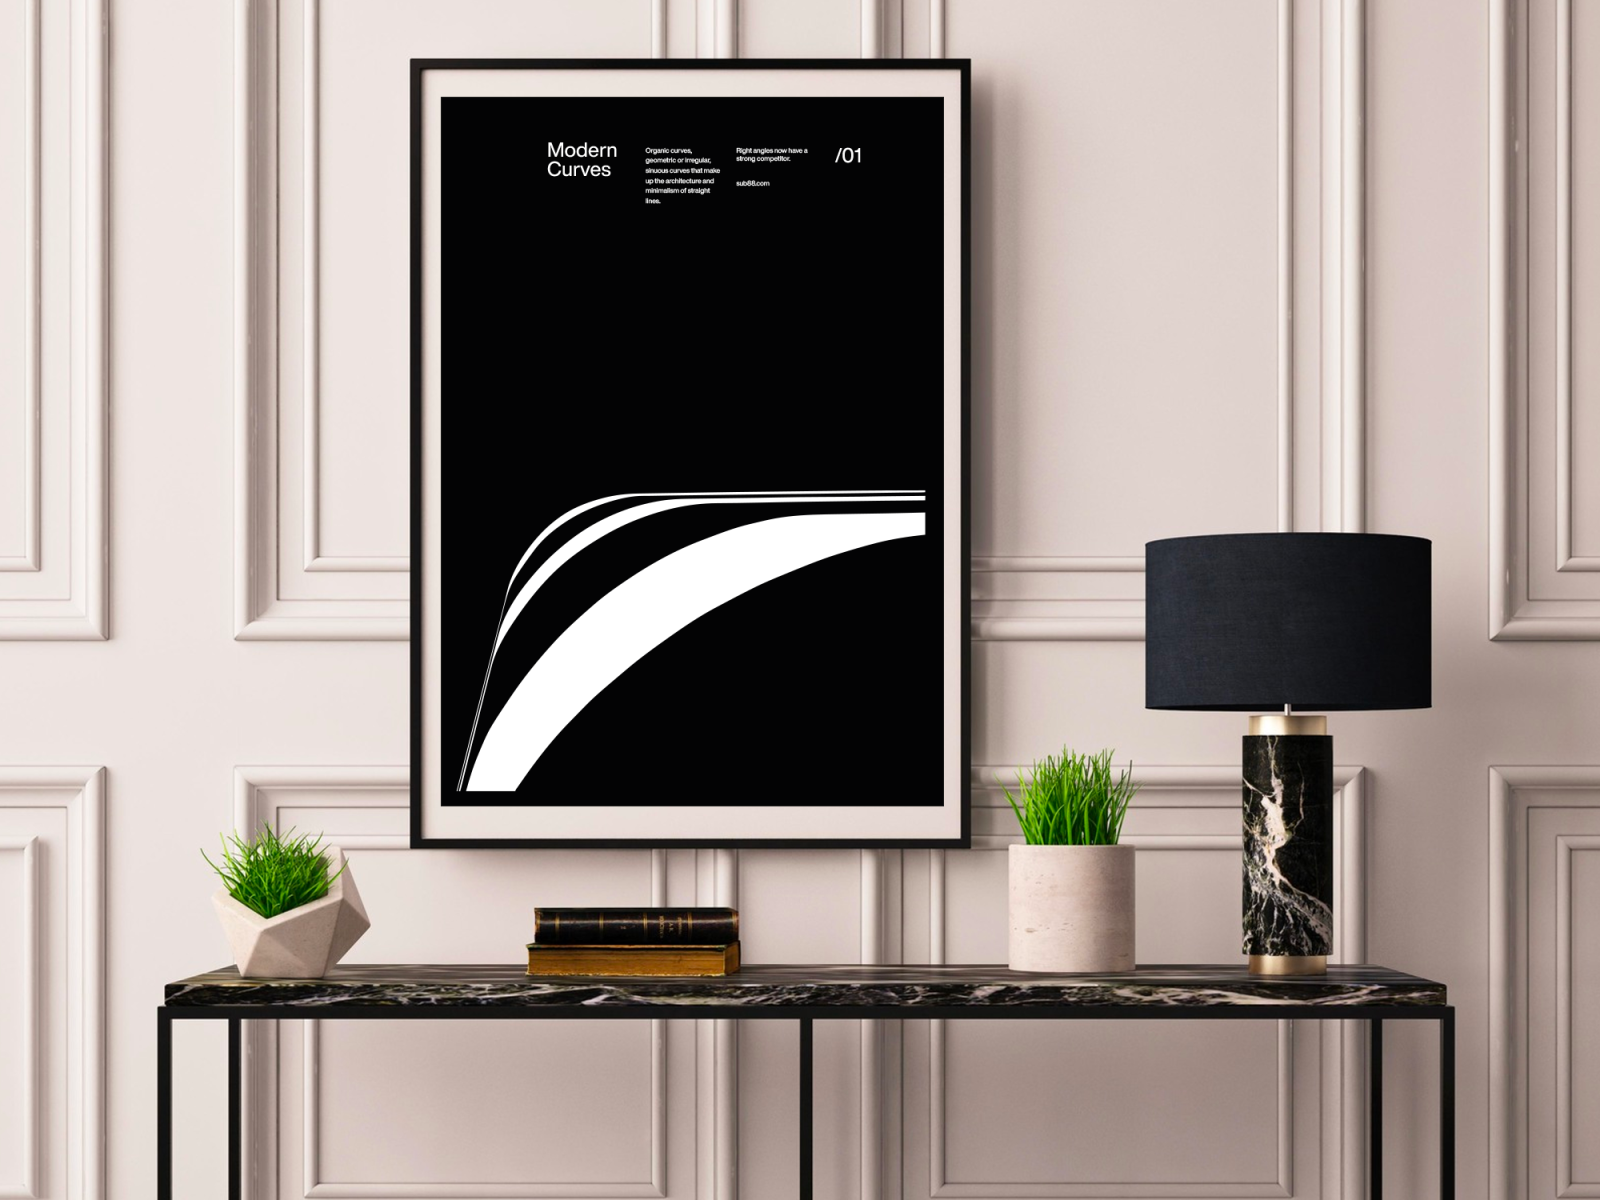 Modern Curves 01 Minimal Typographic Architecture Poster by Sub88 on ...